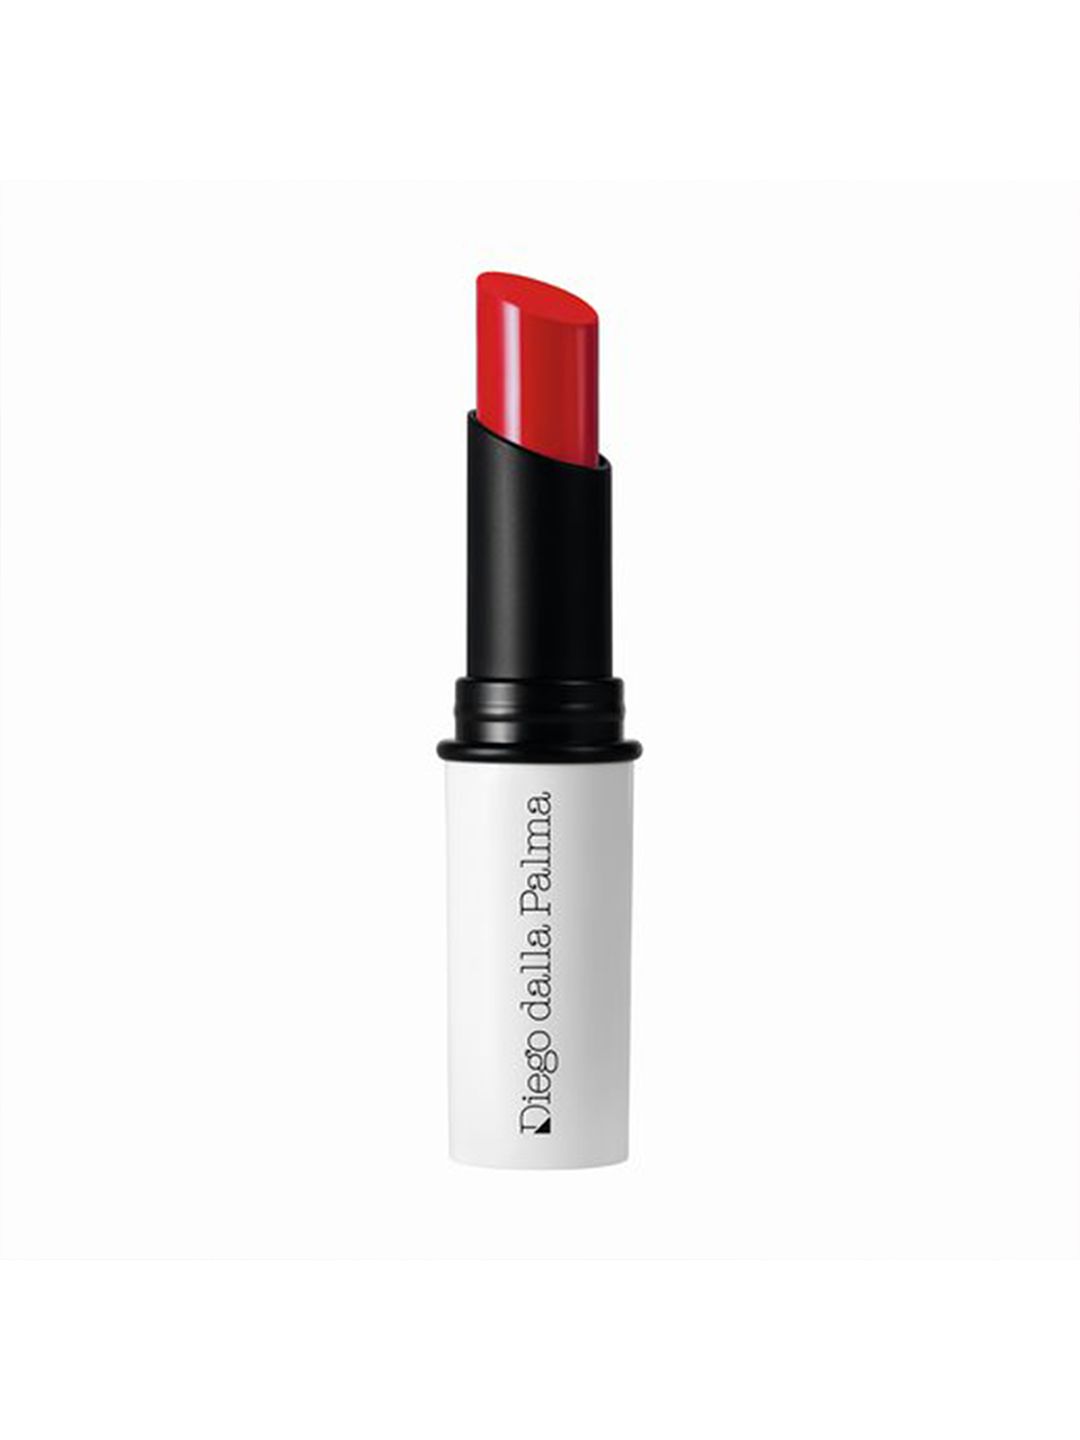 Diego dalla Palma MILANO Semitransparent Shiny Lipstick with Hyaluronic - Cherry Red 141 Price in India